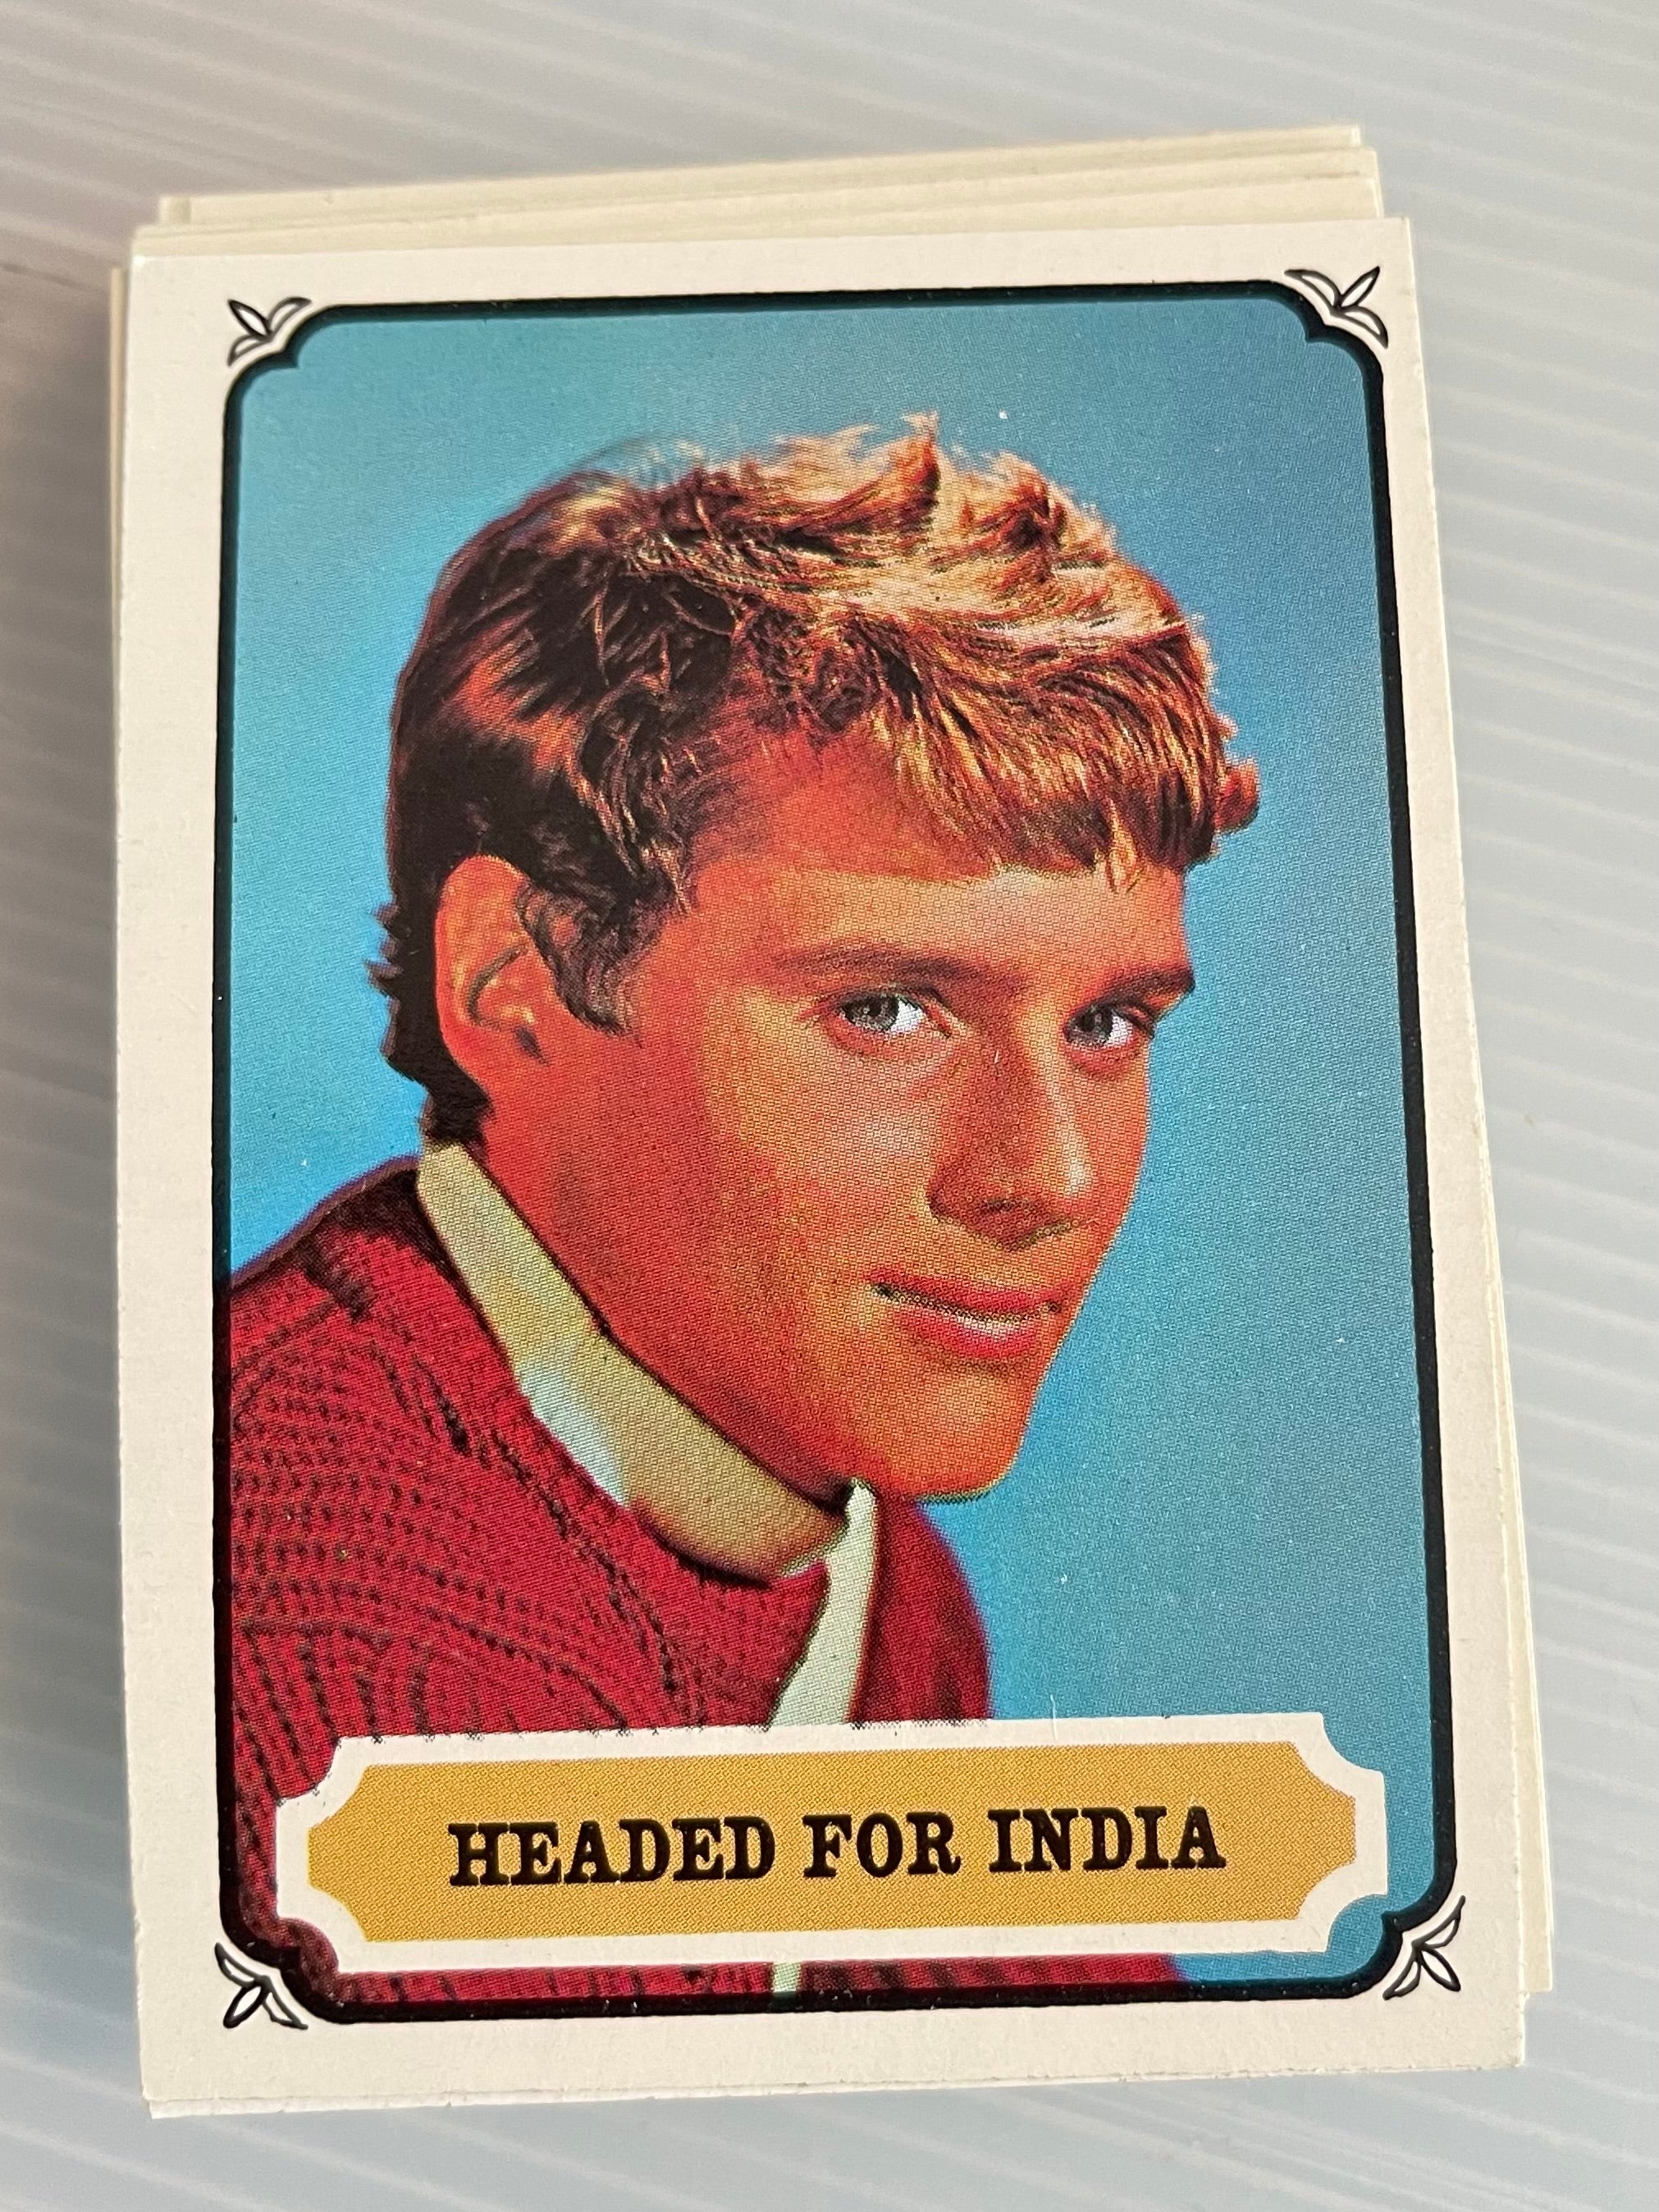 Maya Mysteries of India TV show cards set 1967